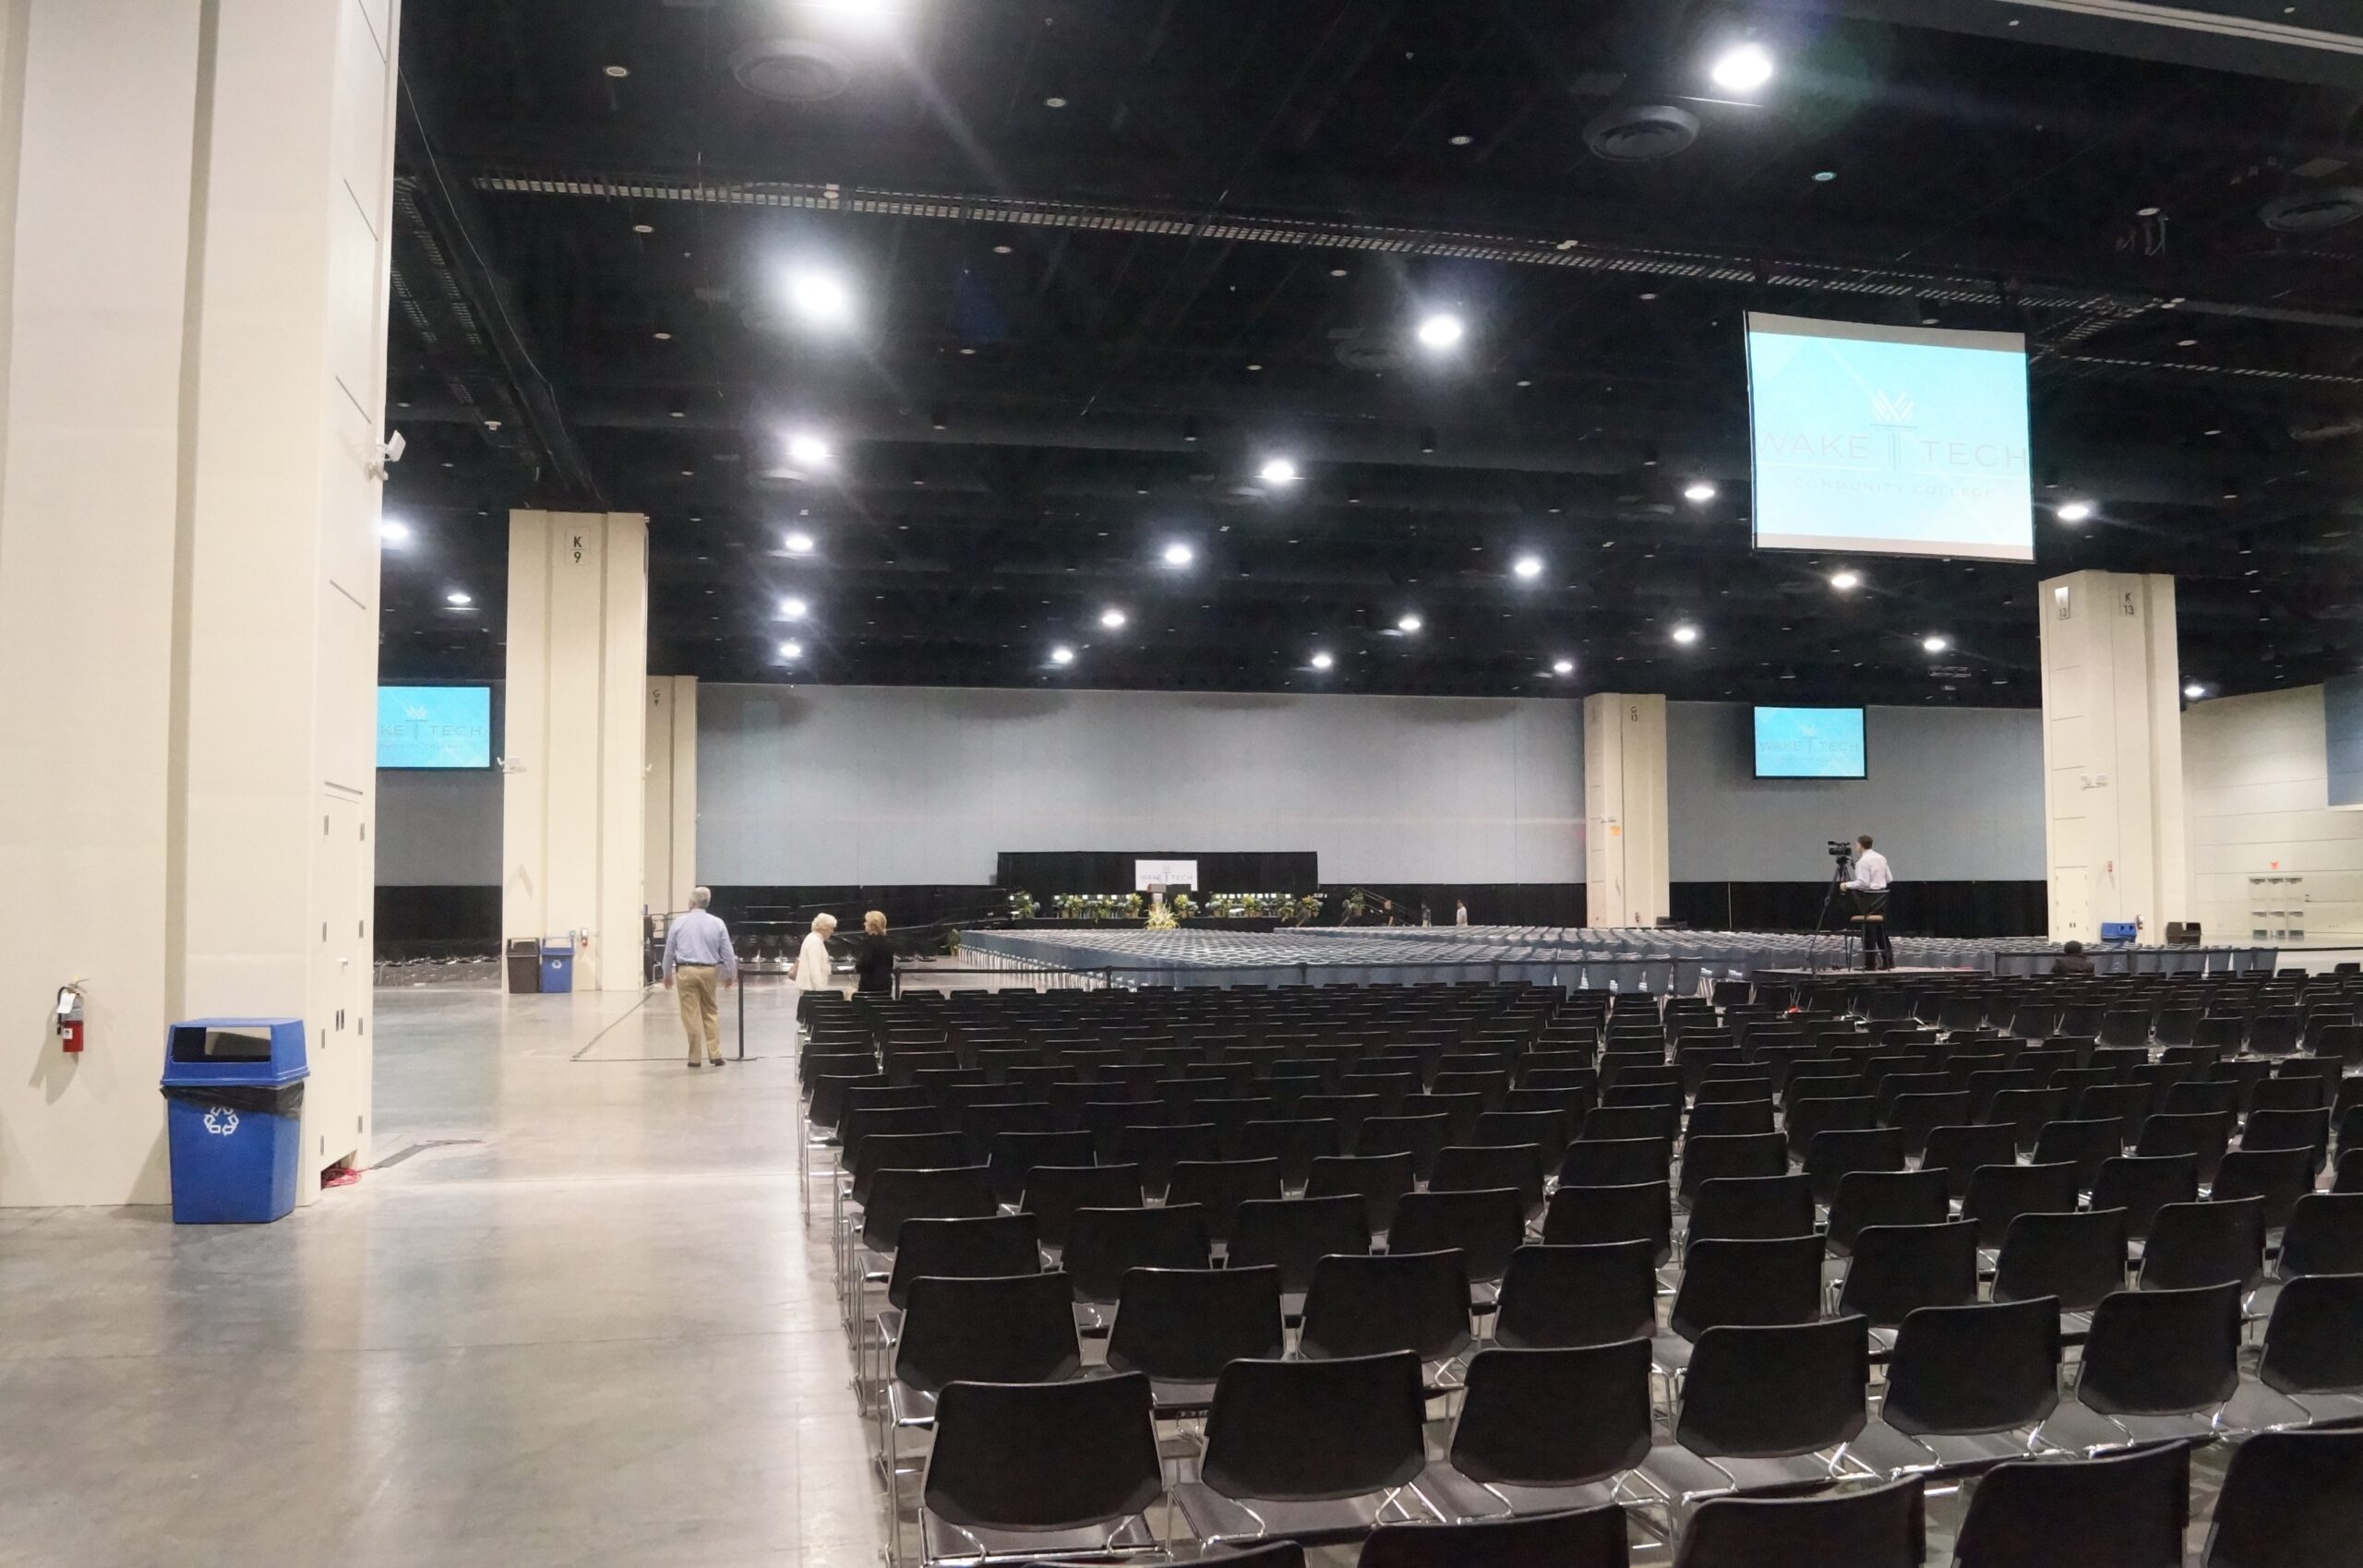 AV rentals raleigh NC by AV Connetions at Raleigh Convention Center